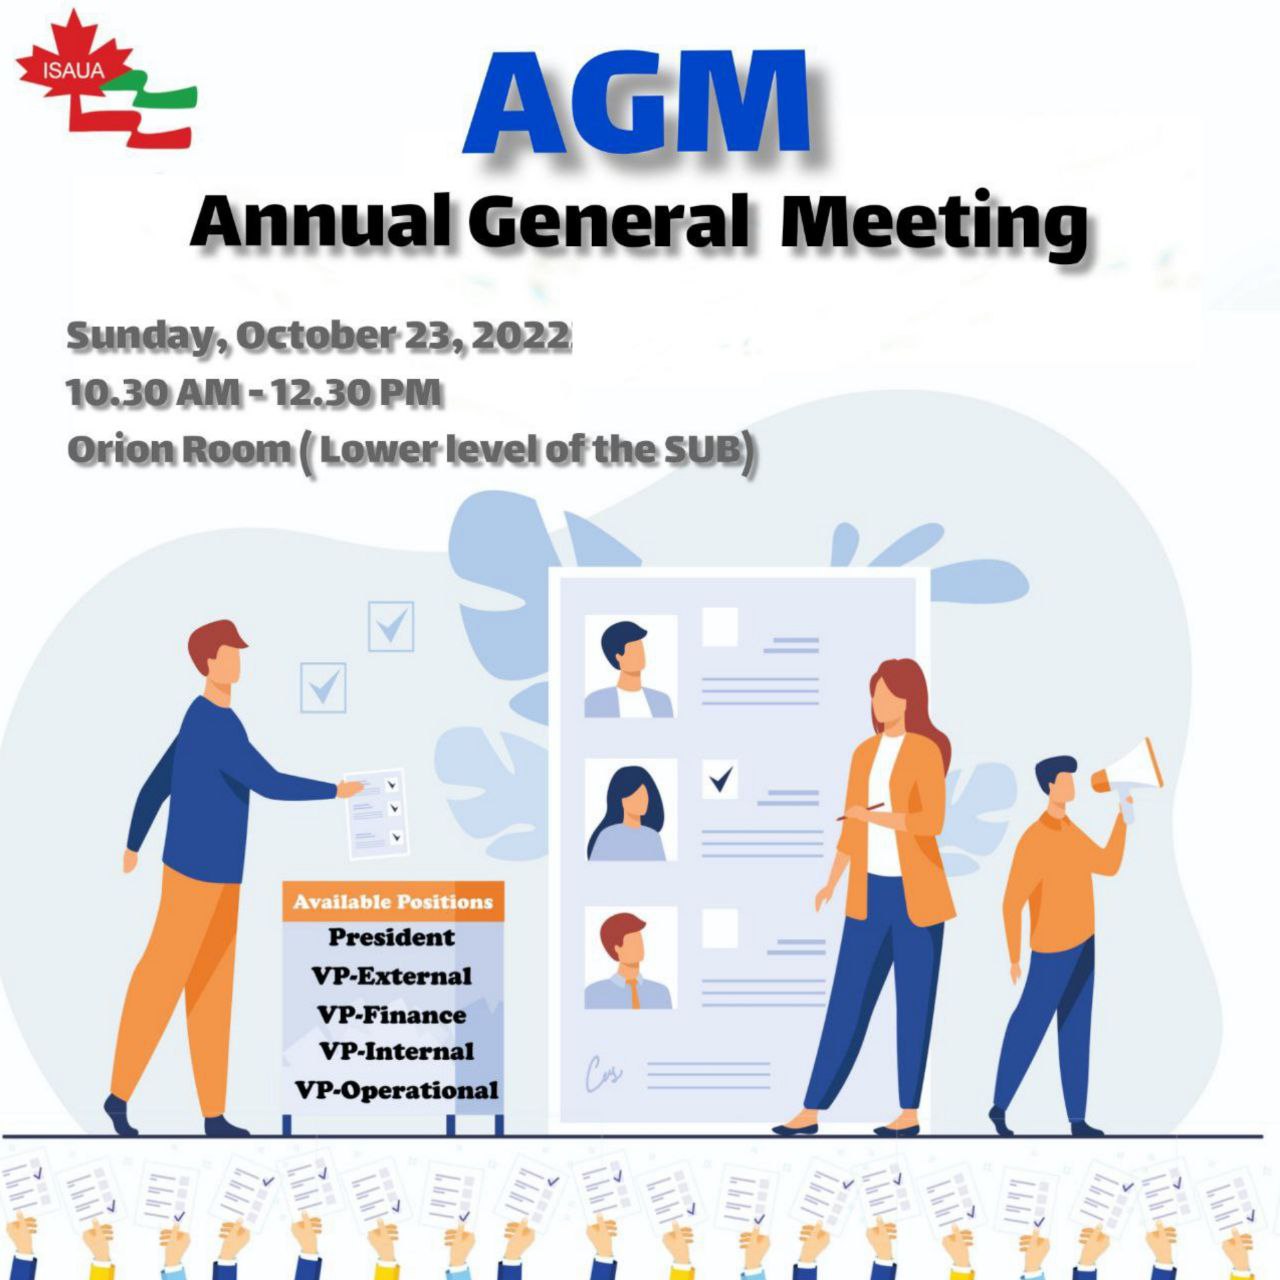 Annual General Meeting @ Orion Room